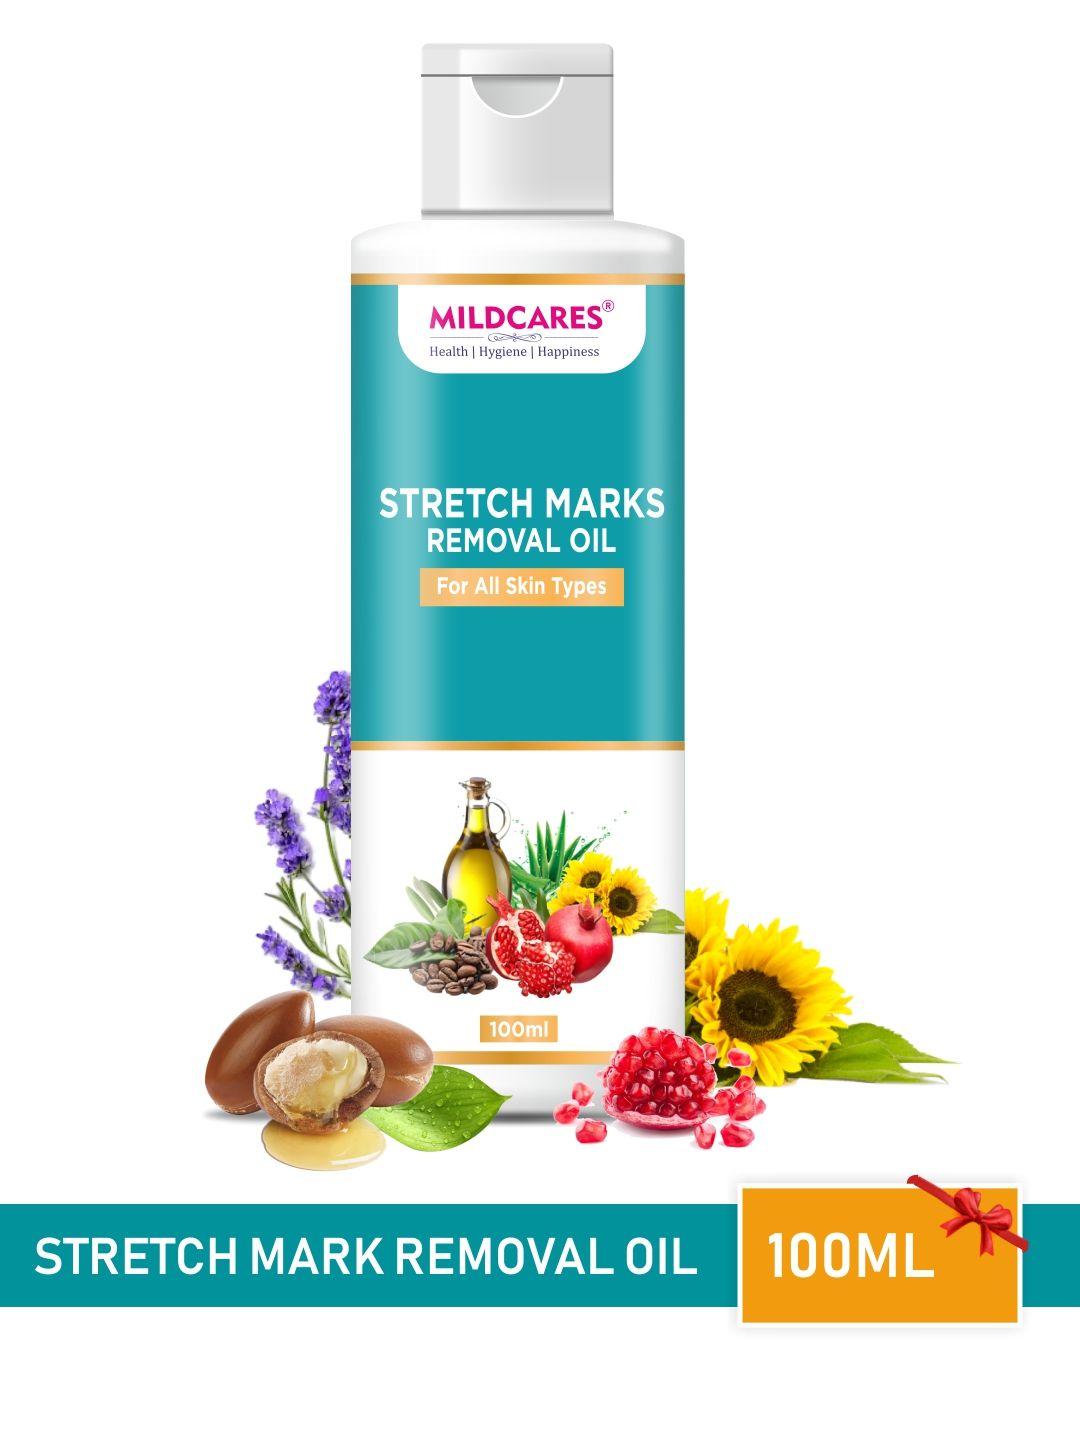 mildcares stretch marks removal oil for all skin types - 100ml